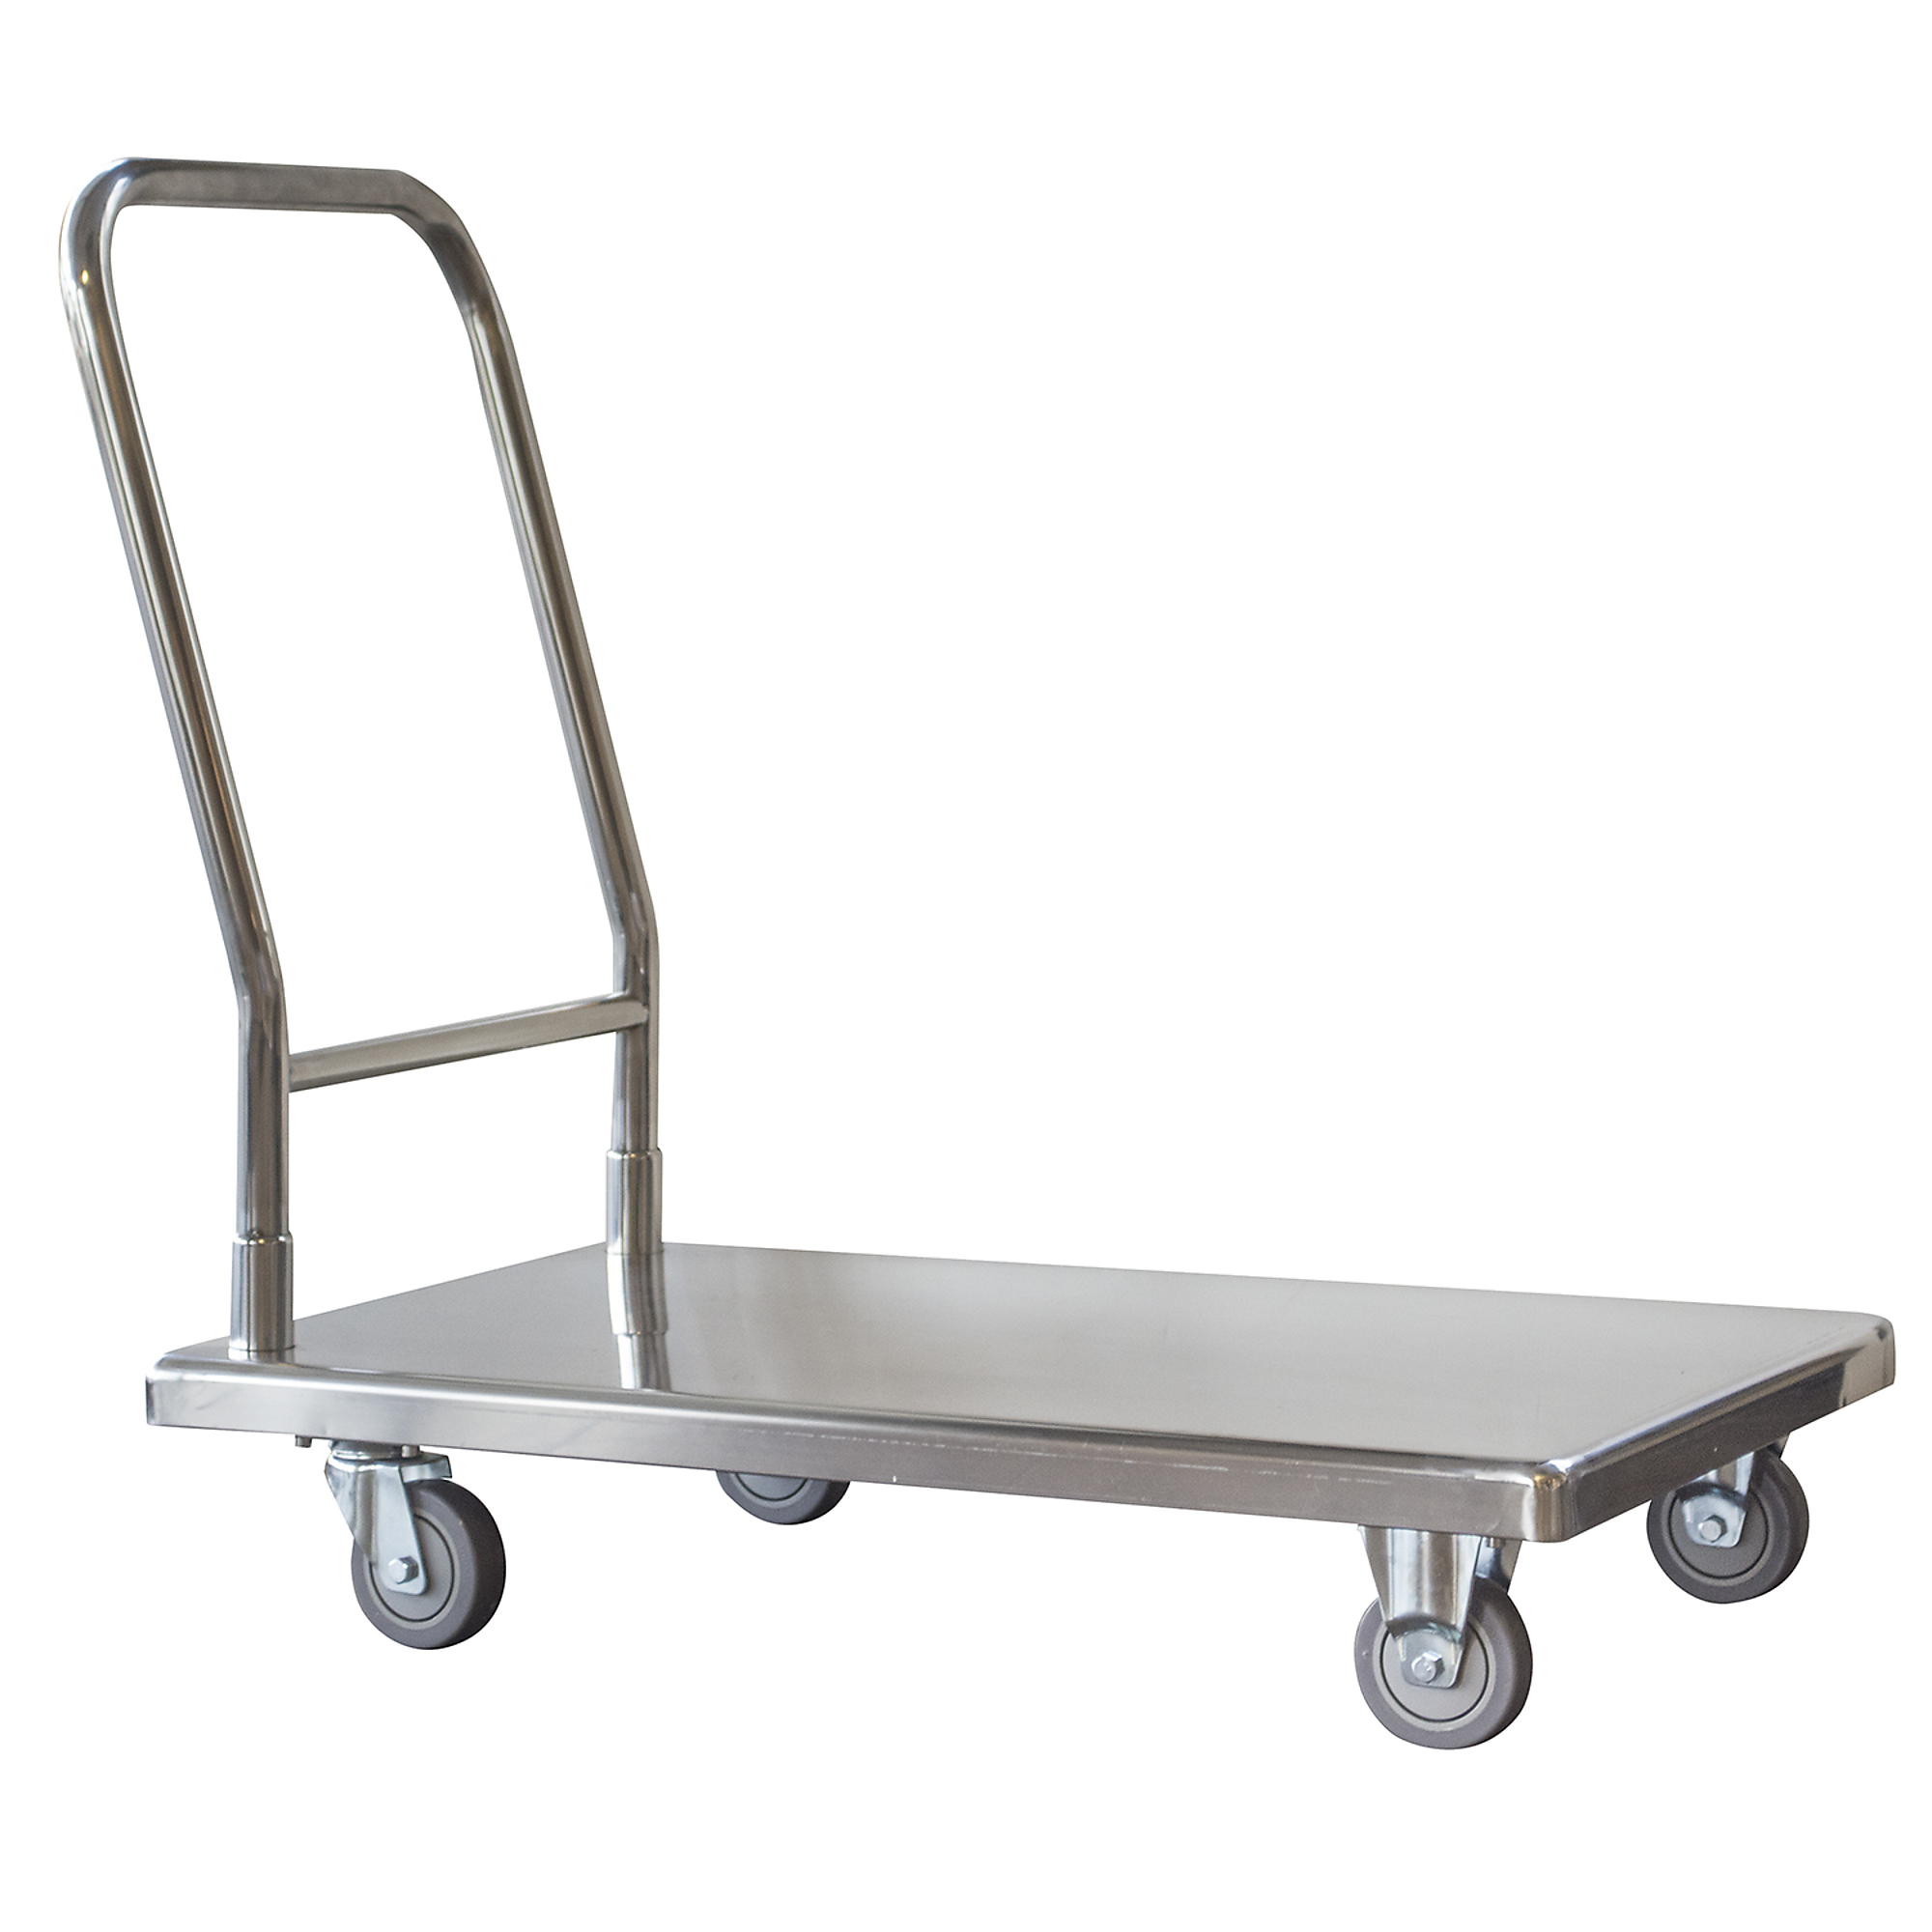 ProSeries, Stainless Steel Platform Truck 500 lbs Capacity, Capacity 500 lb, Platform Width 34 in, Platform Length 36 in, Model FPT500SS